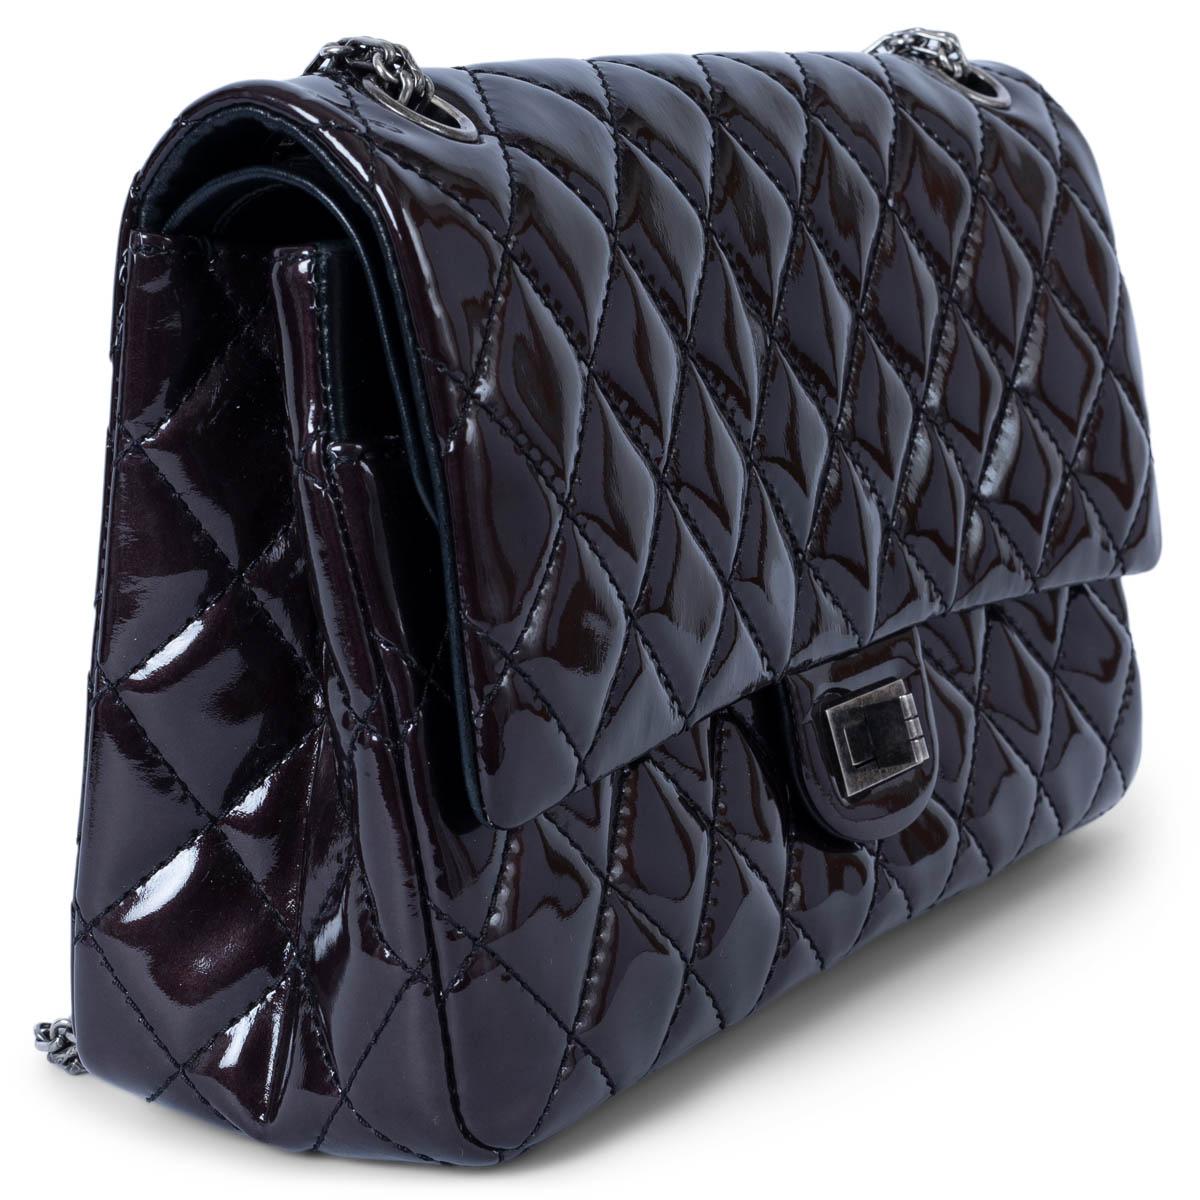 100% authentic Chanel 2.55 Reissue 226 double flap bag in dark brown patent leather featuring classic diamond quilted stitching and ruthenium hardware. Opens with a turn-lock to a black smooth calfskin interior with two patch pockets and one